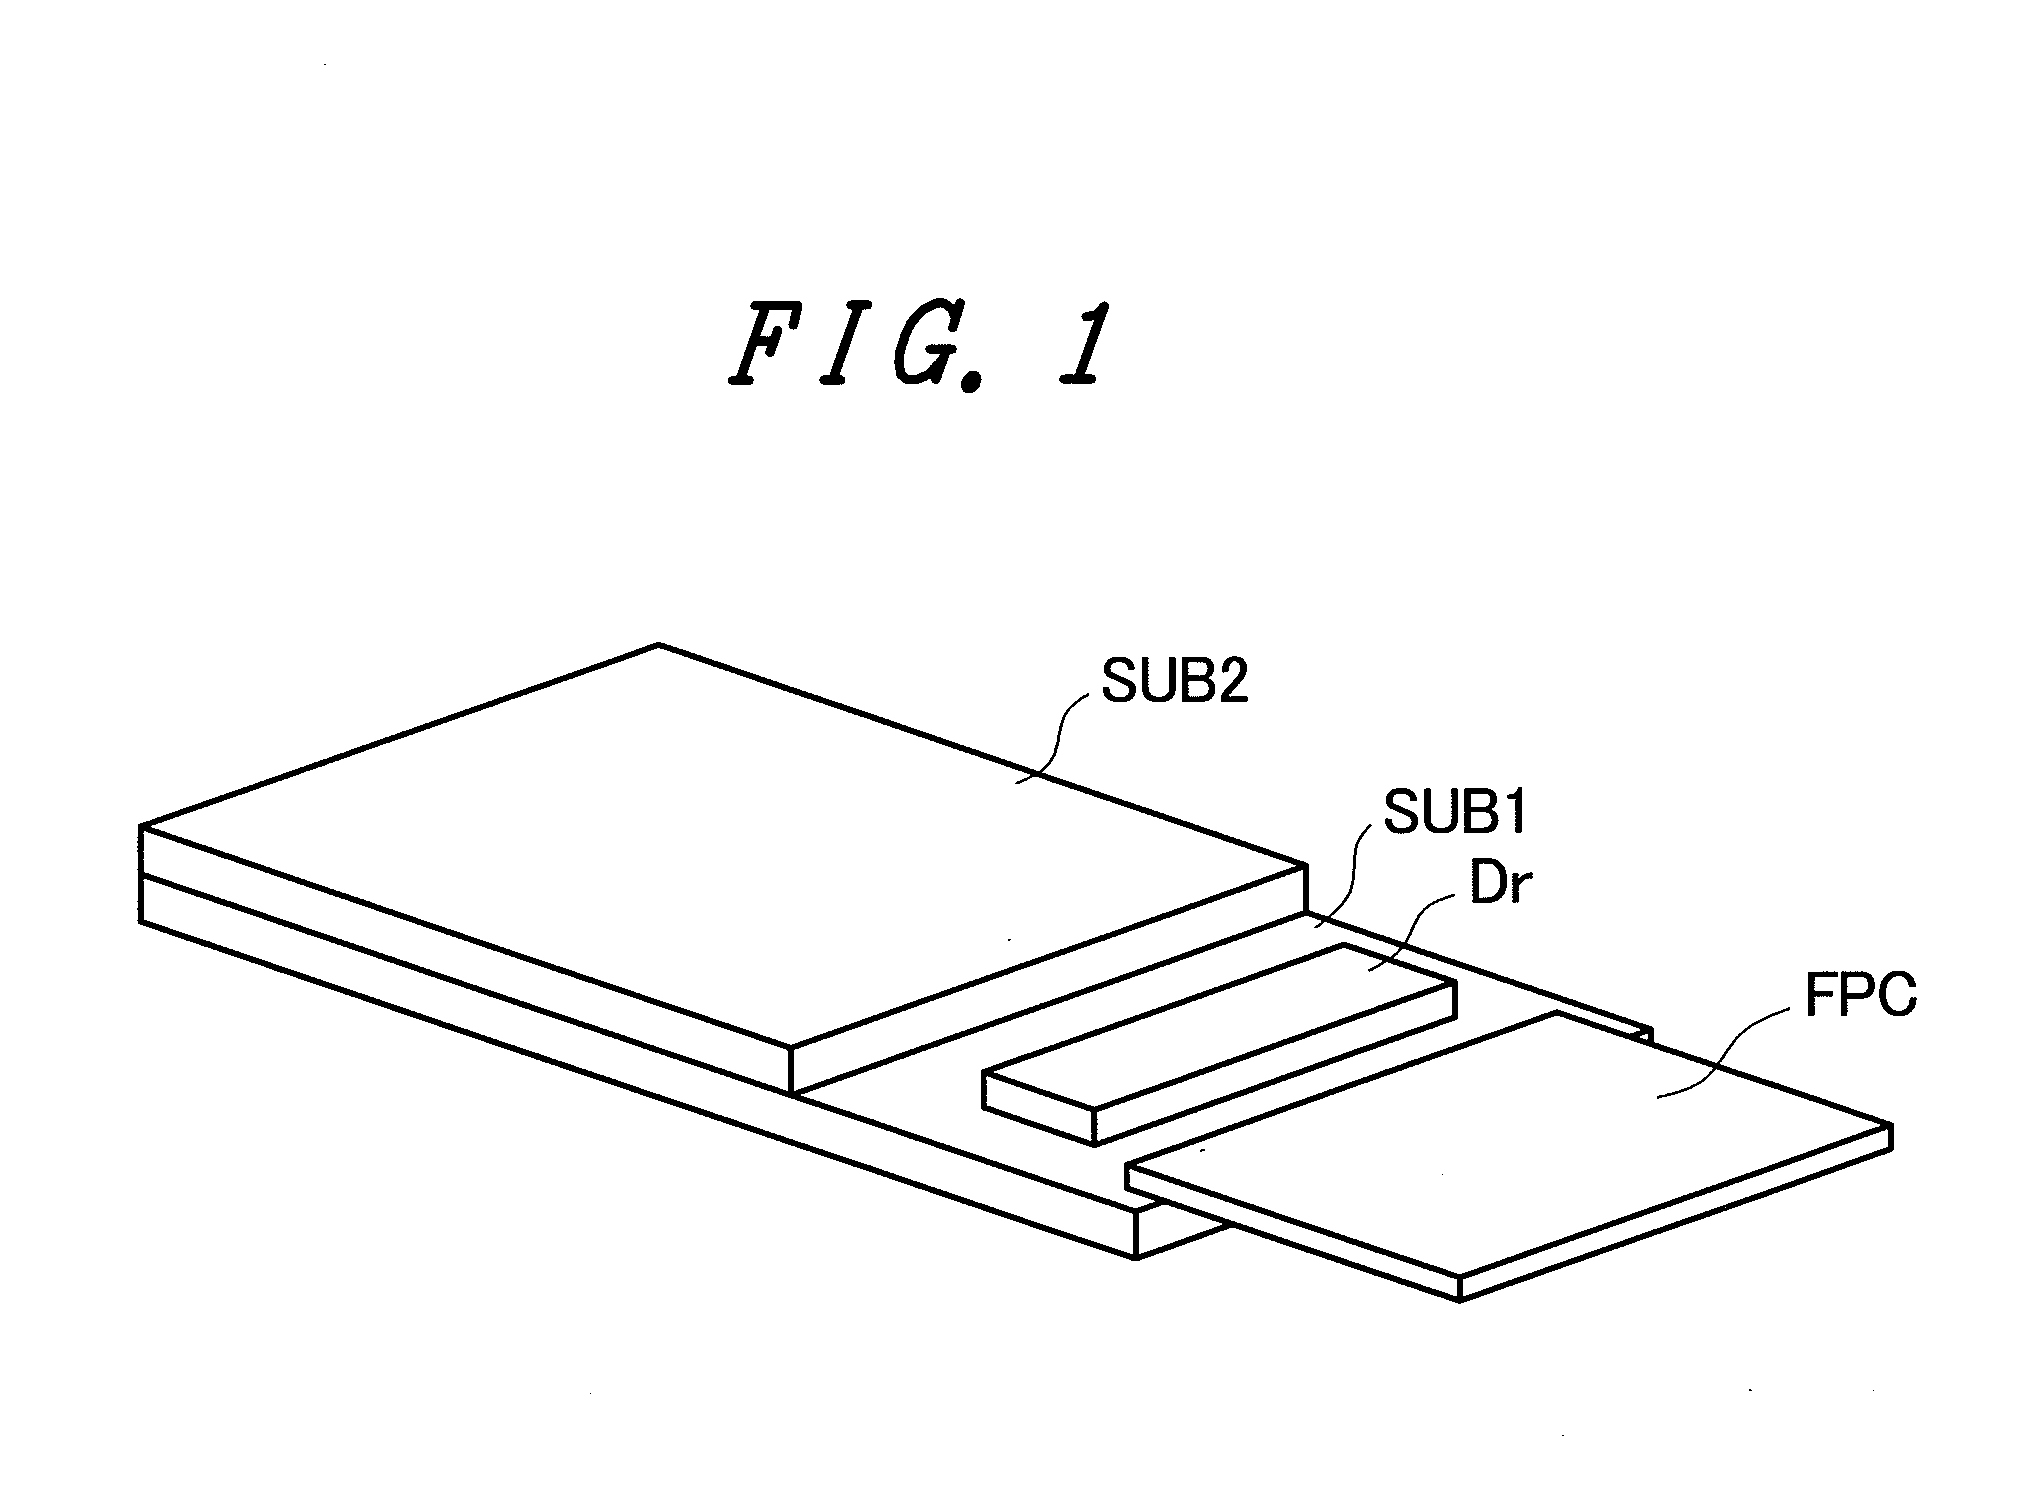 Liquid crystal dispaly device with touch screen